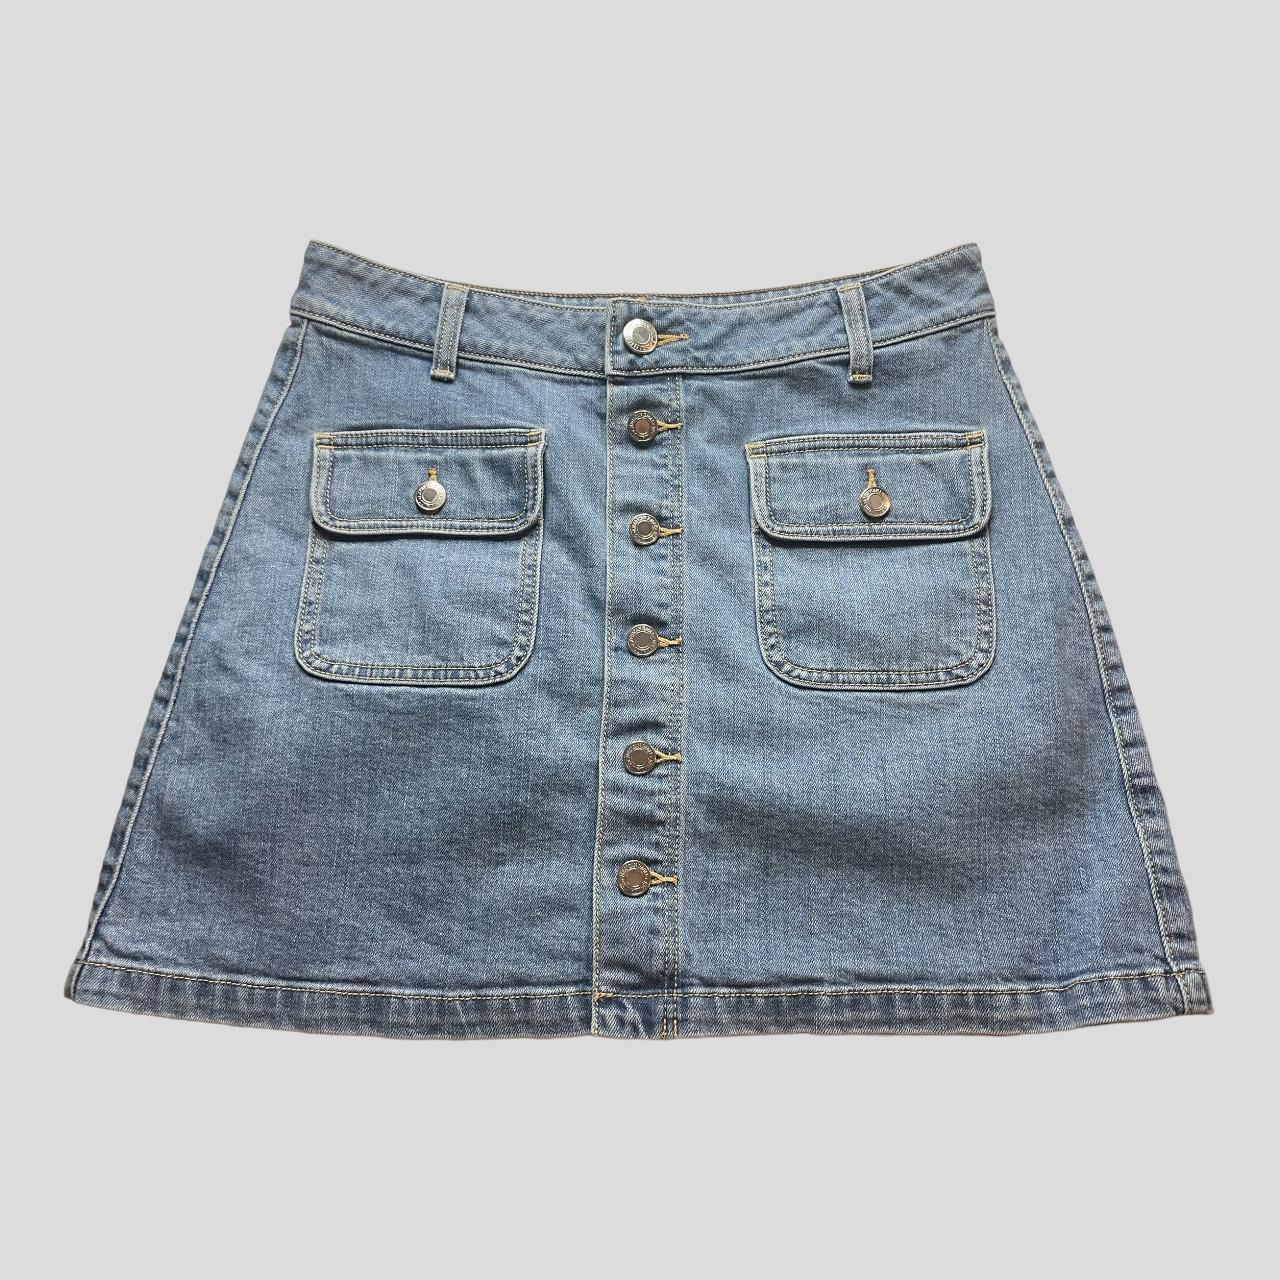 American Eagle Outfitters Women's Blue Skirt | Depop